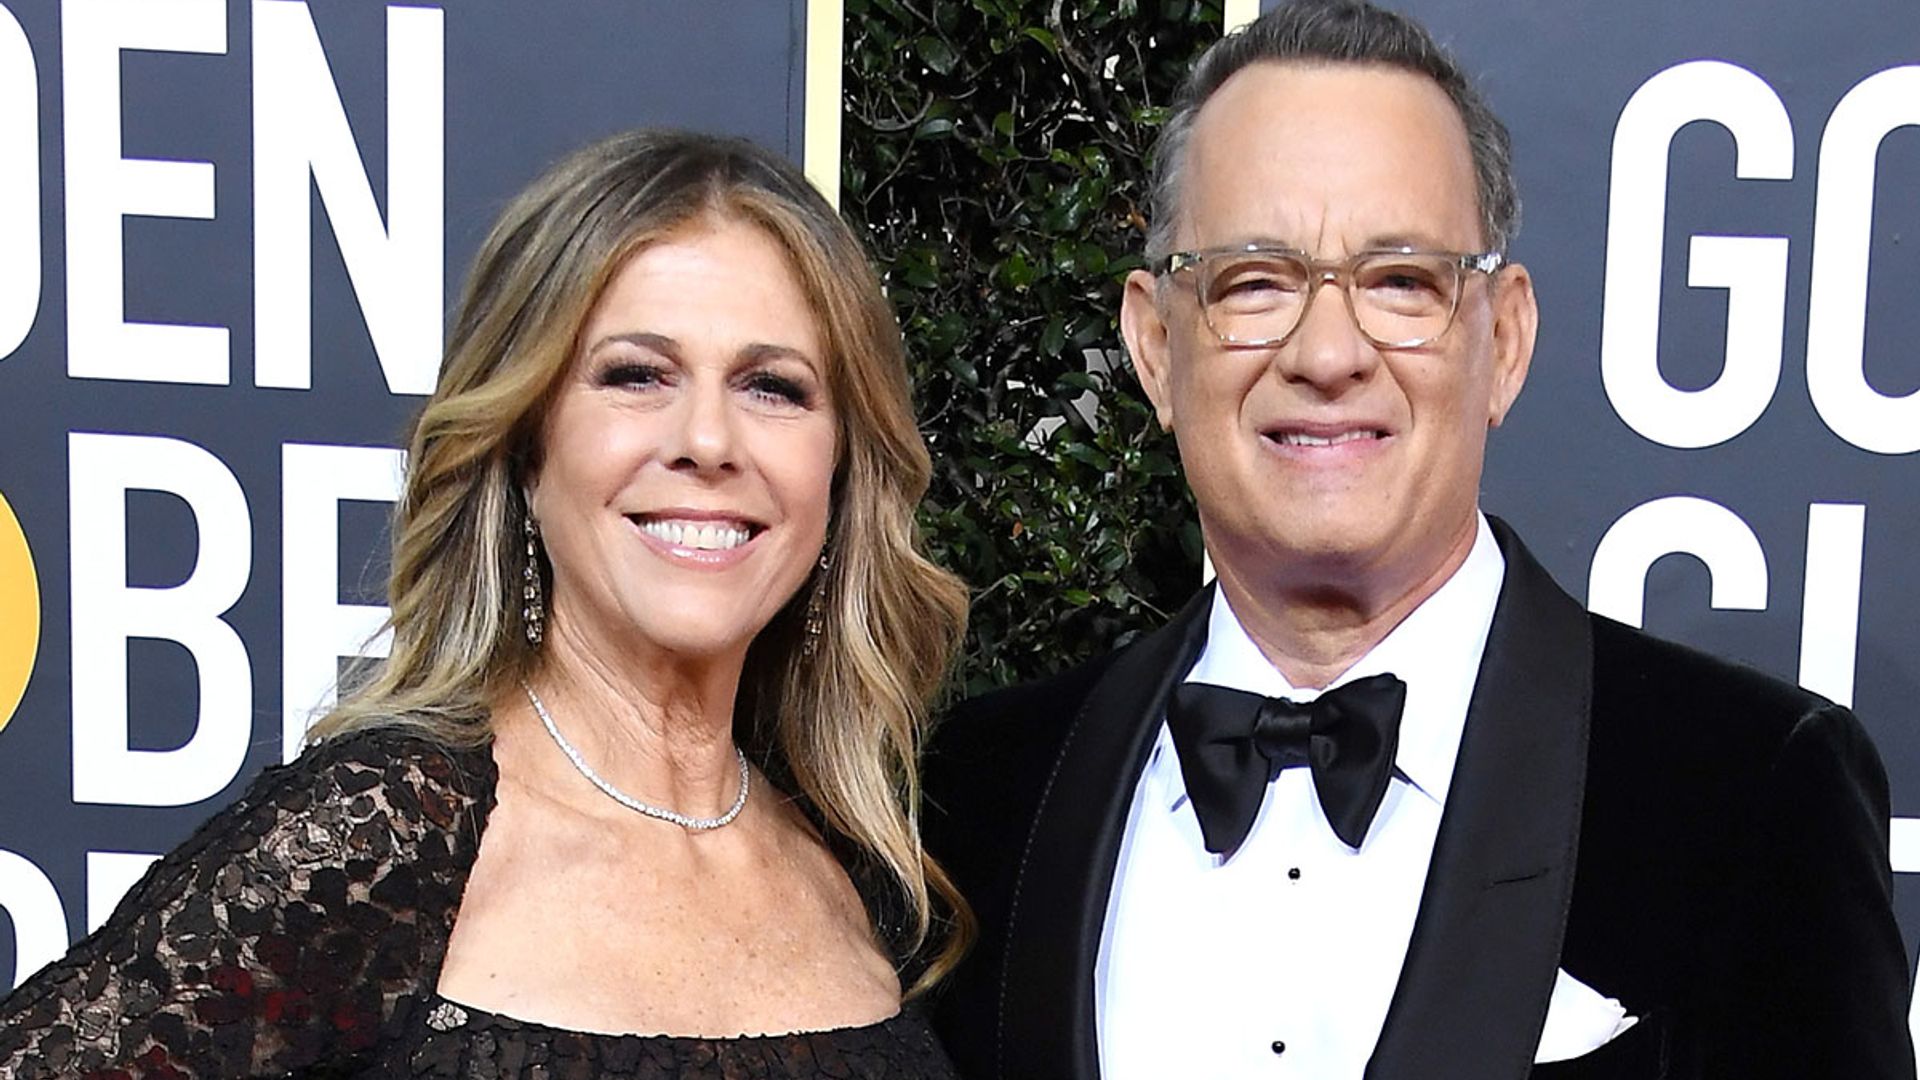 Tom Hanks reveals extreme exhaustion and details other symptoms one week into coronavirus infection